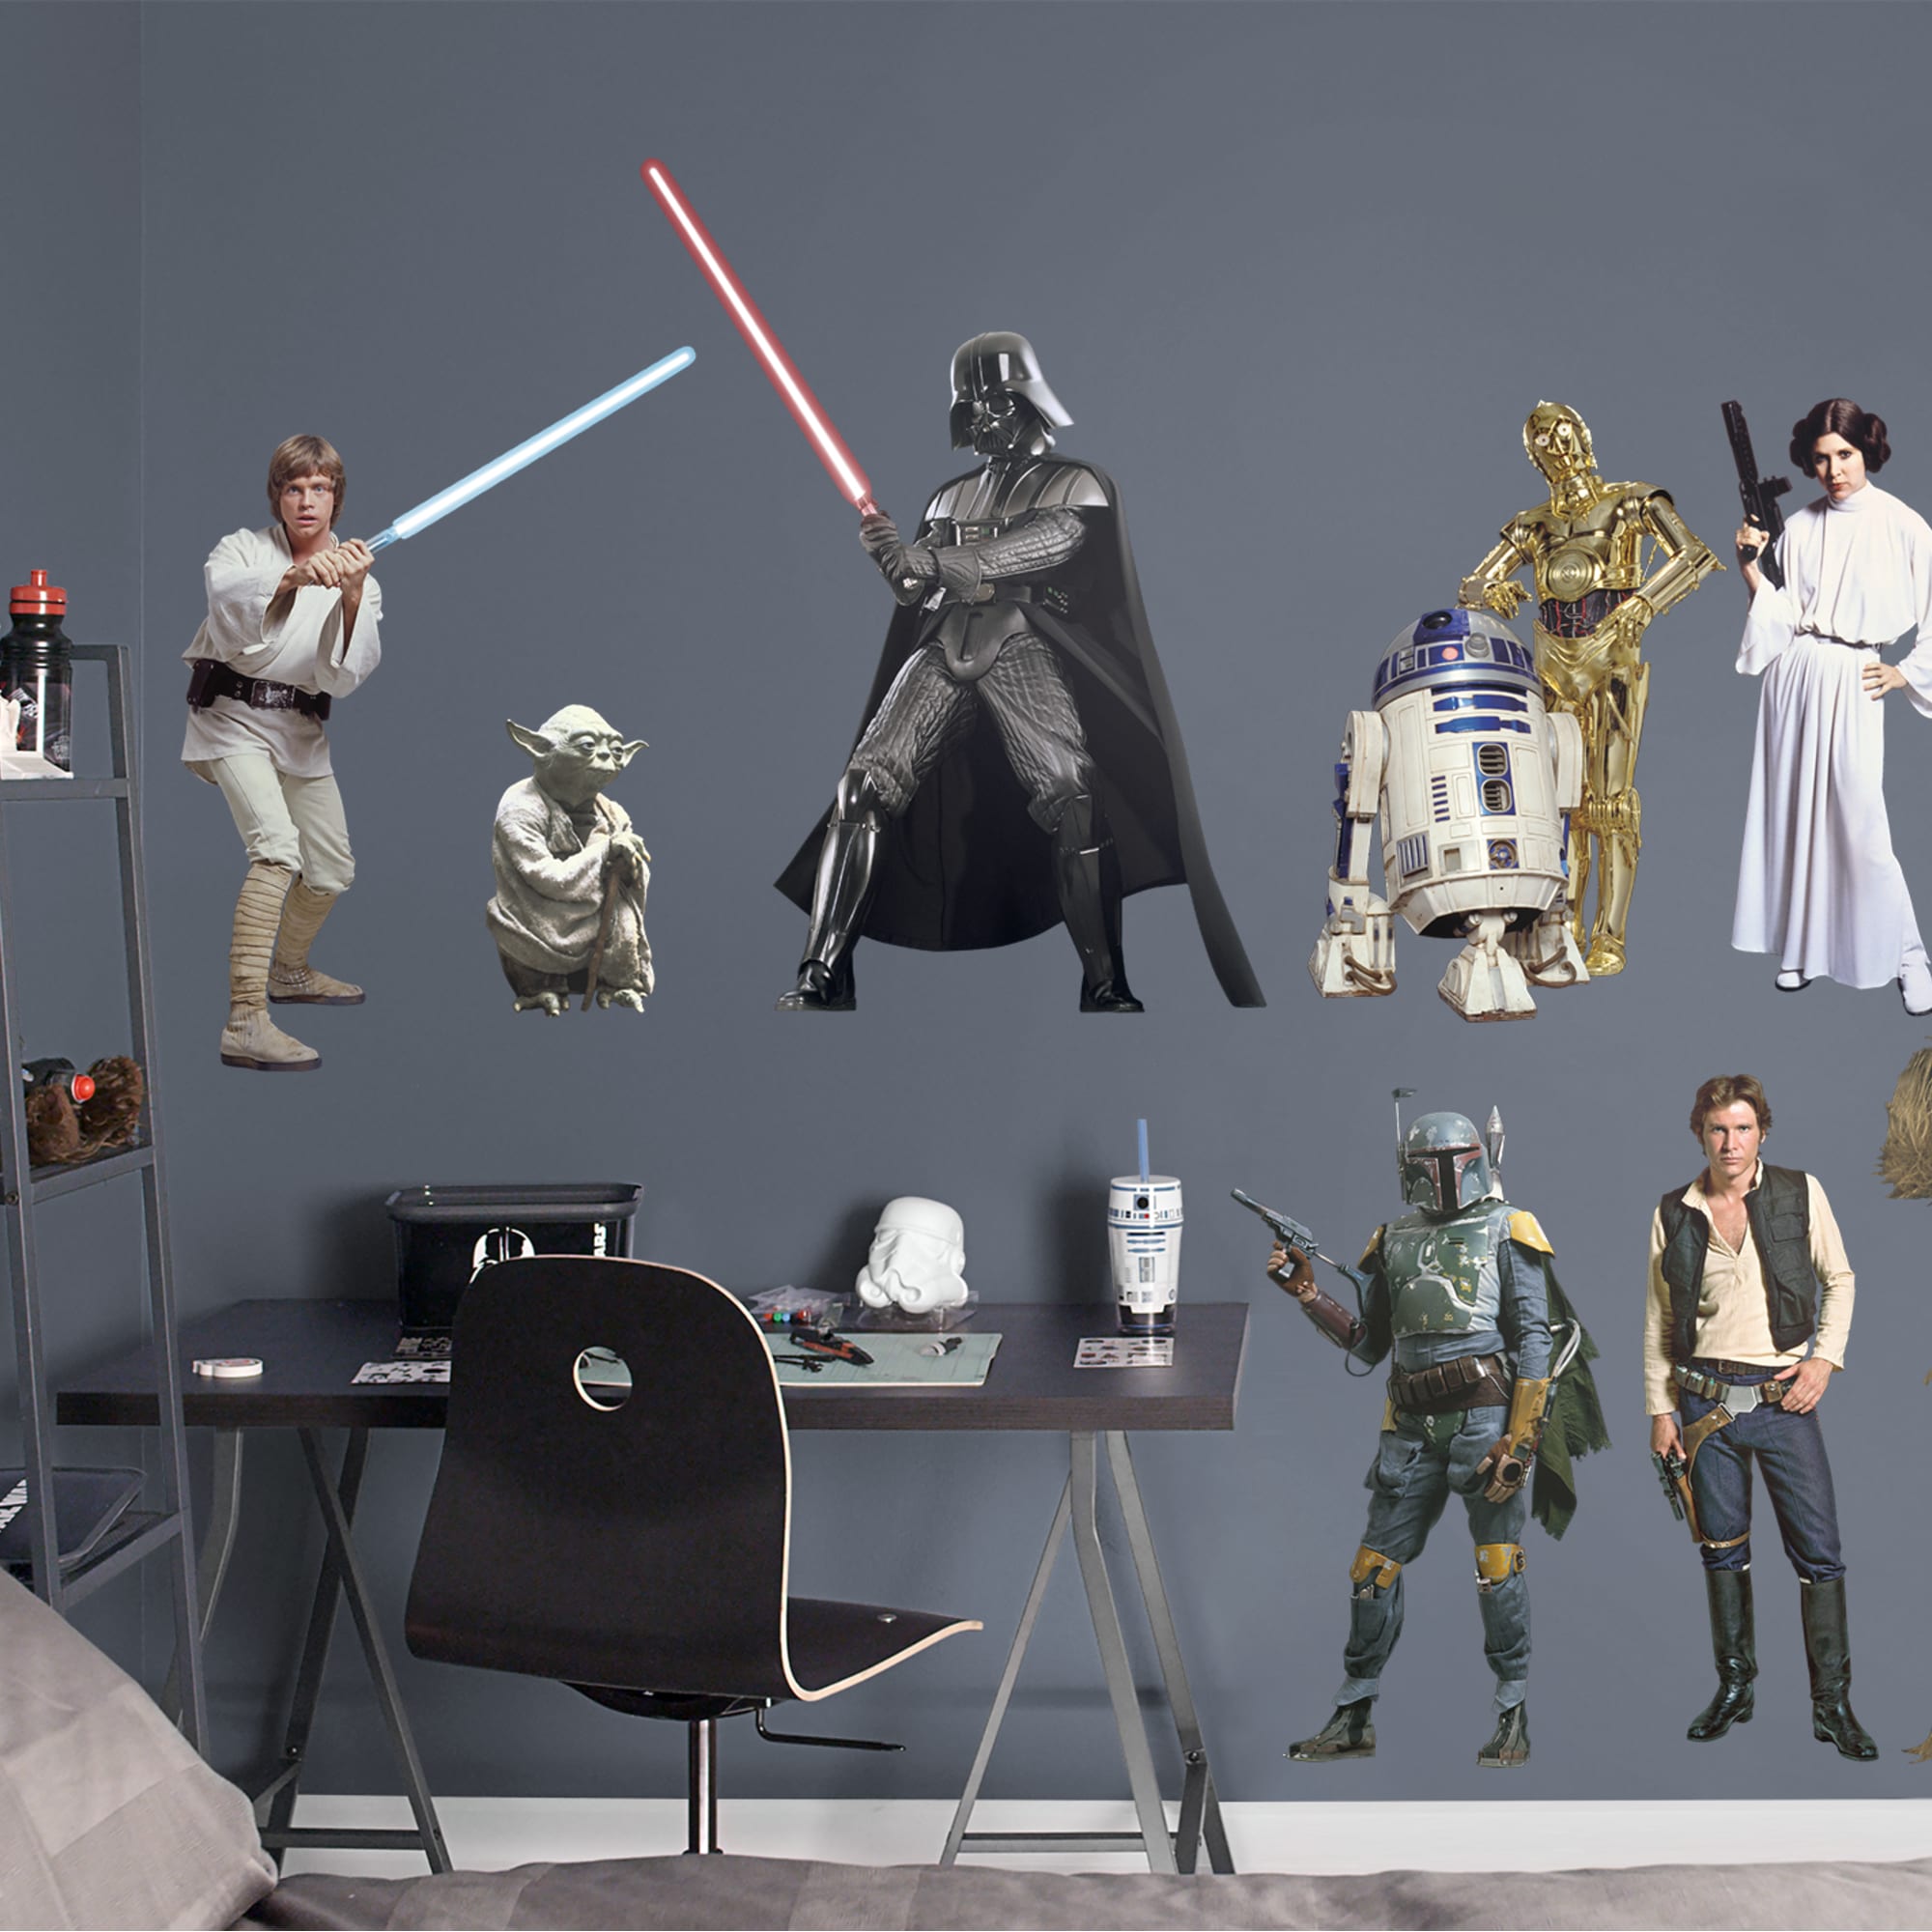 Star Wars: Original Trilogy Characters Collection - Officially Licensed Removable Wall Decals 79.0"W x 52.0"H by Fathead | Vinyl